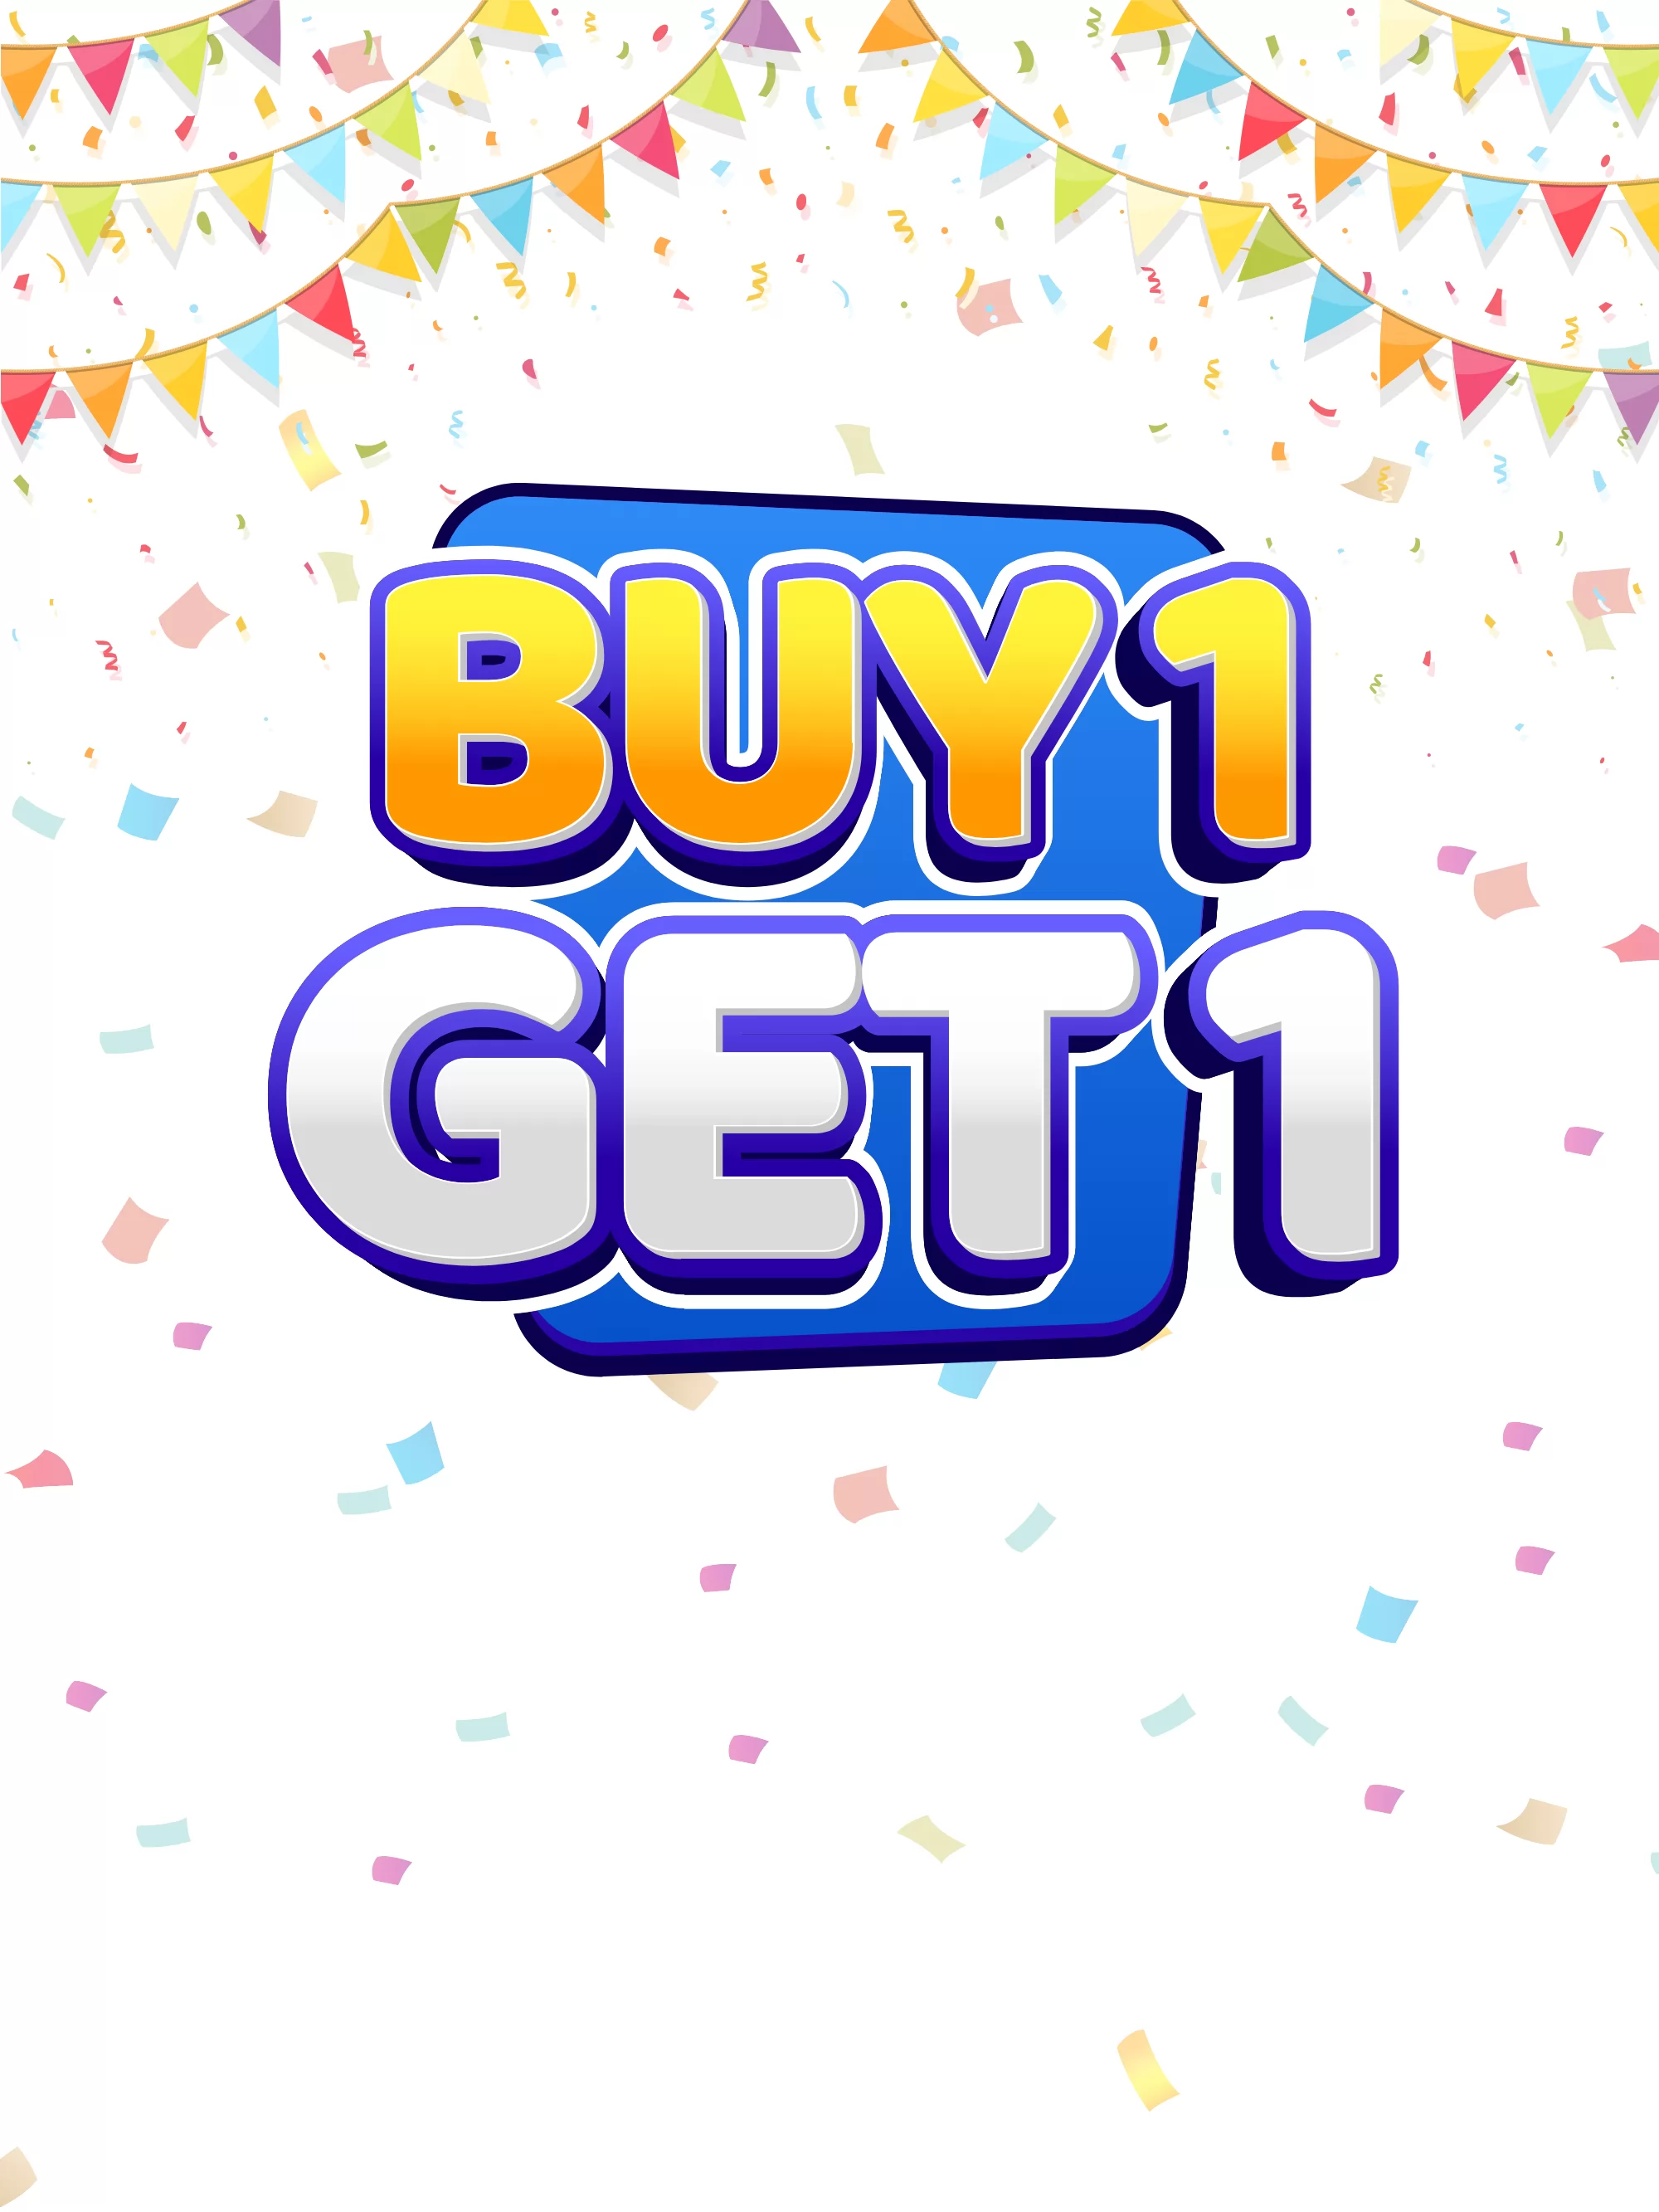 All Buy 1 Get 1 Free Offers : Top Brands Added